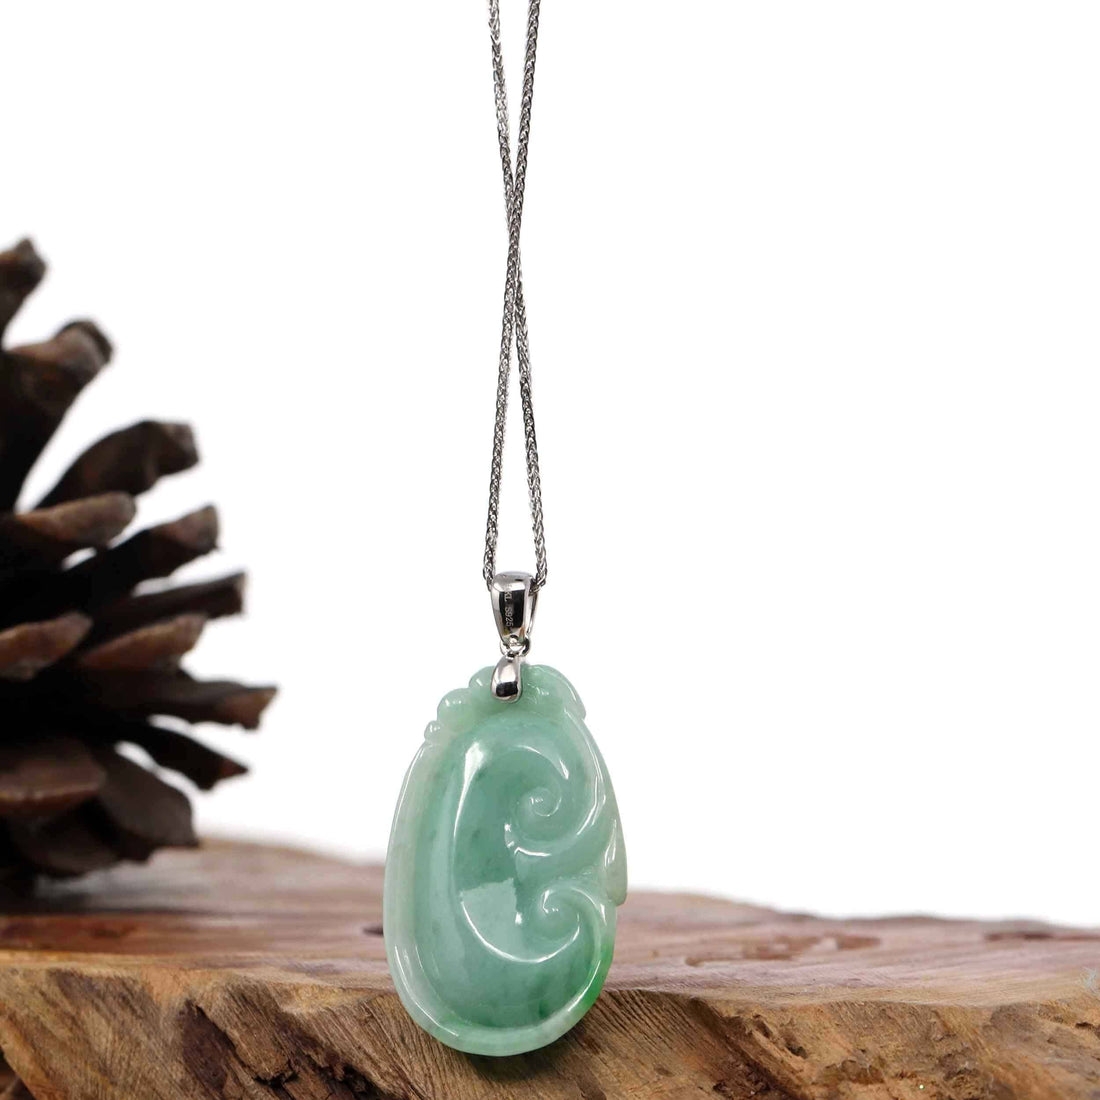 Baikalla Jewelry Jade Guanyin Pendant Necklace Copy of Copy of Copy of Natural Light Green Jadeite Jade Ru Yi Pendant Necklace With Sterling Silver Bail